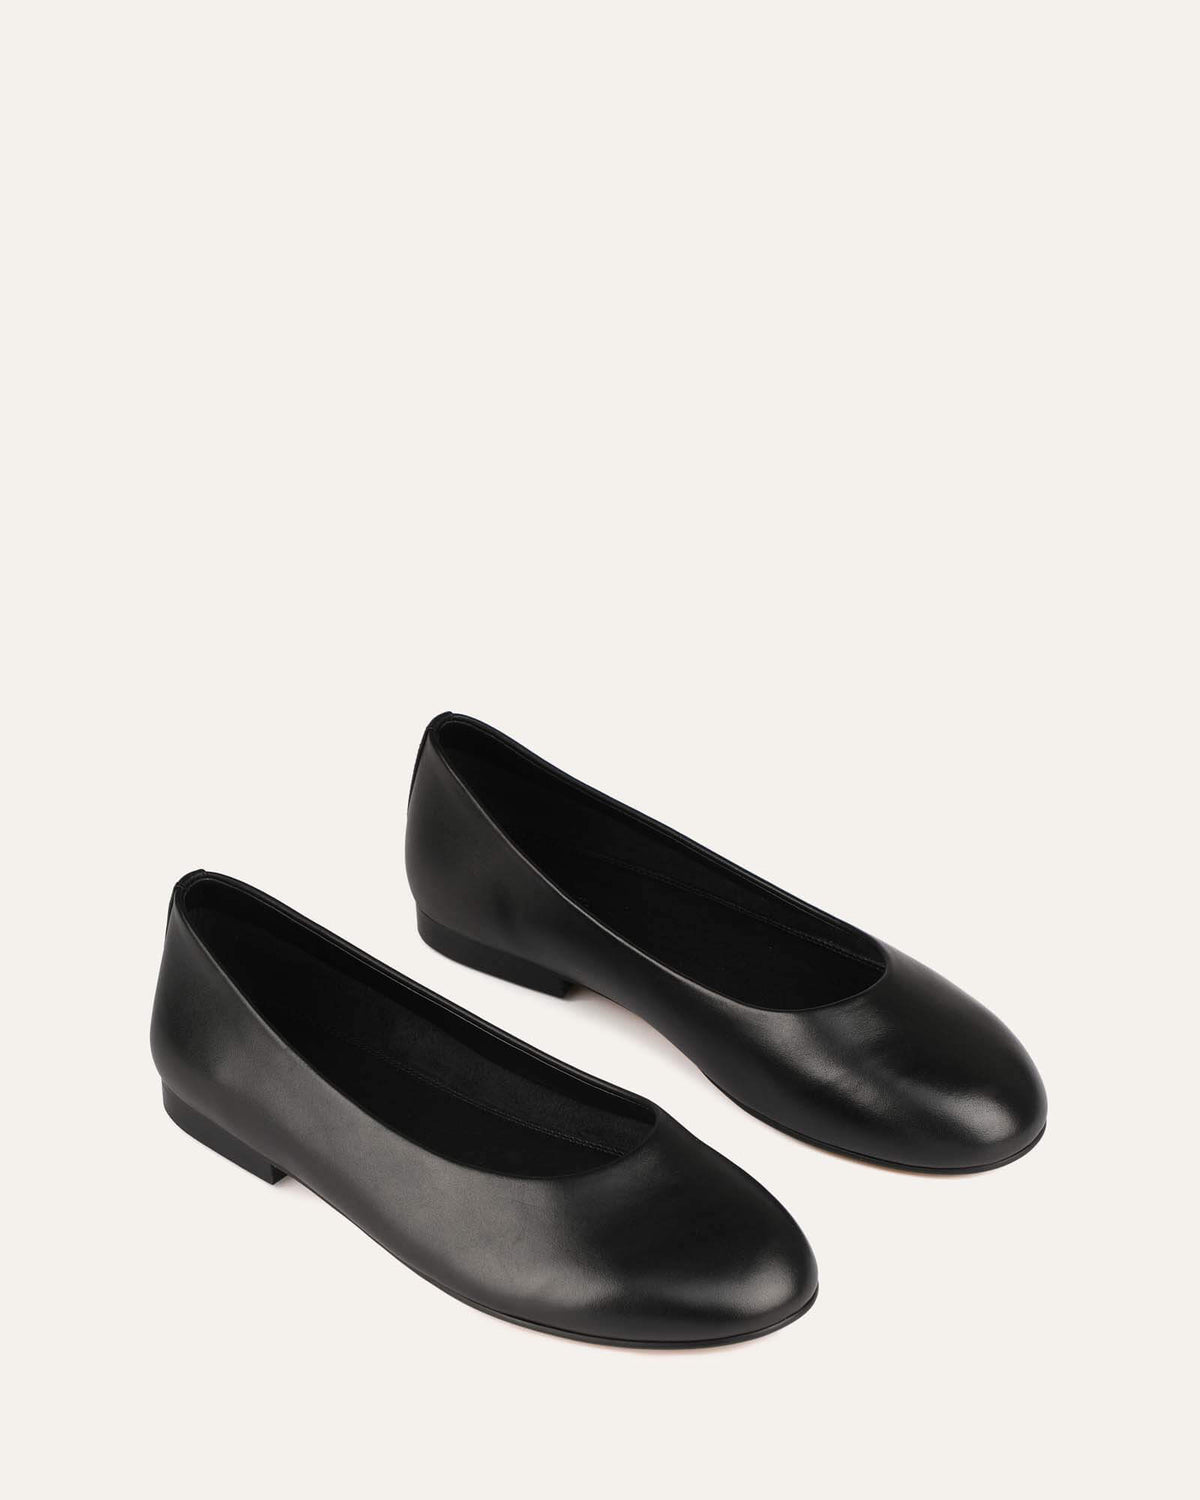 FINCH CASUAL FLATS BLACK LEATHER